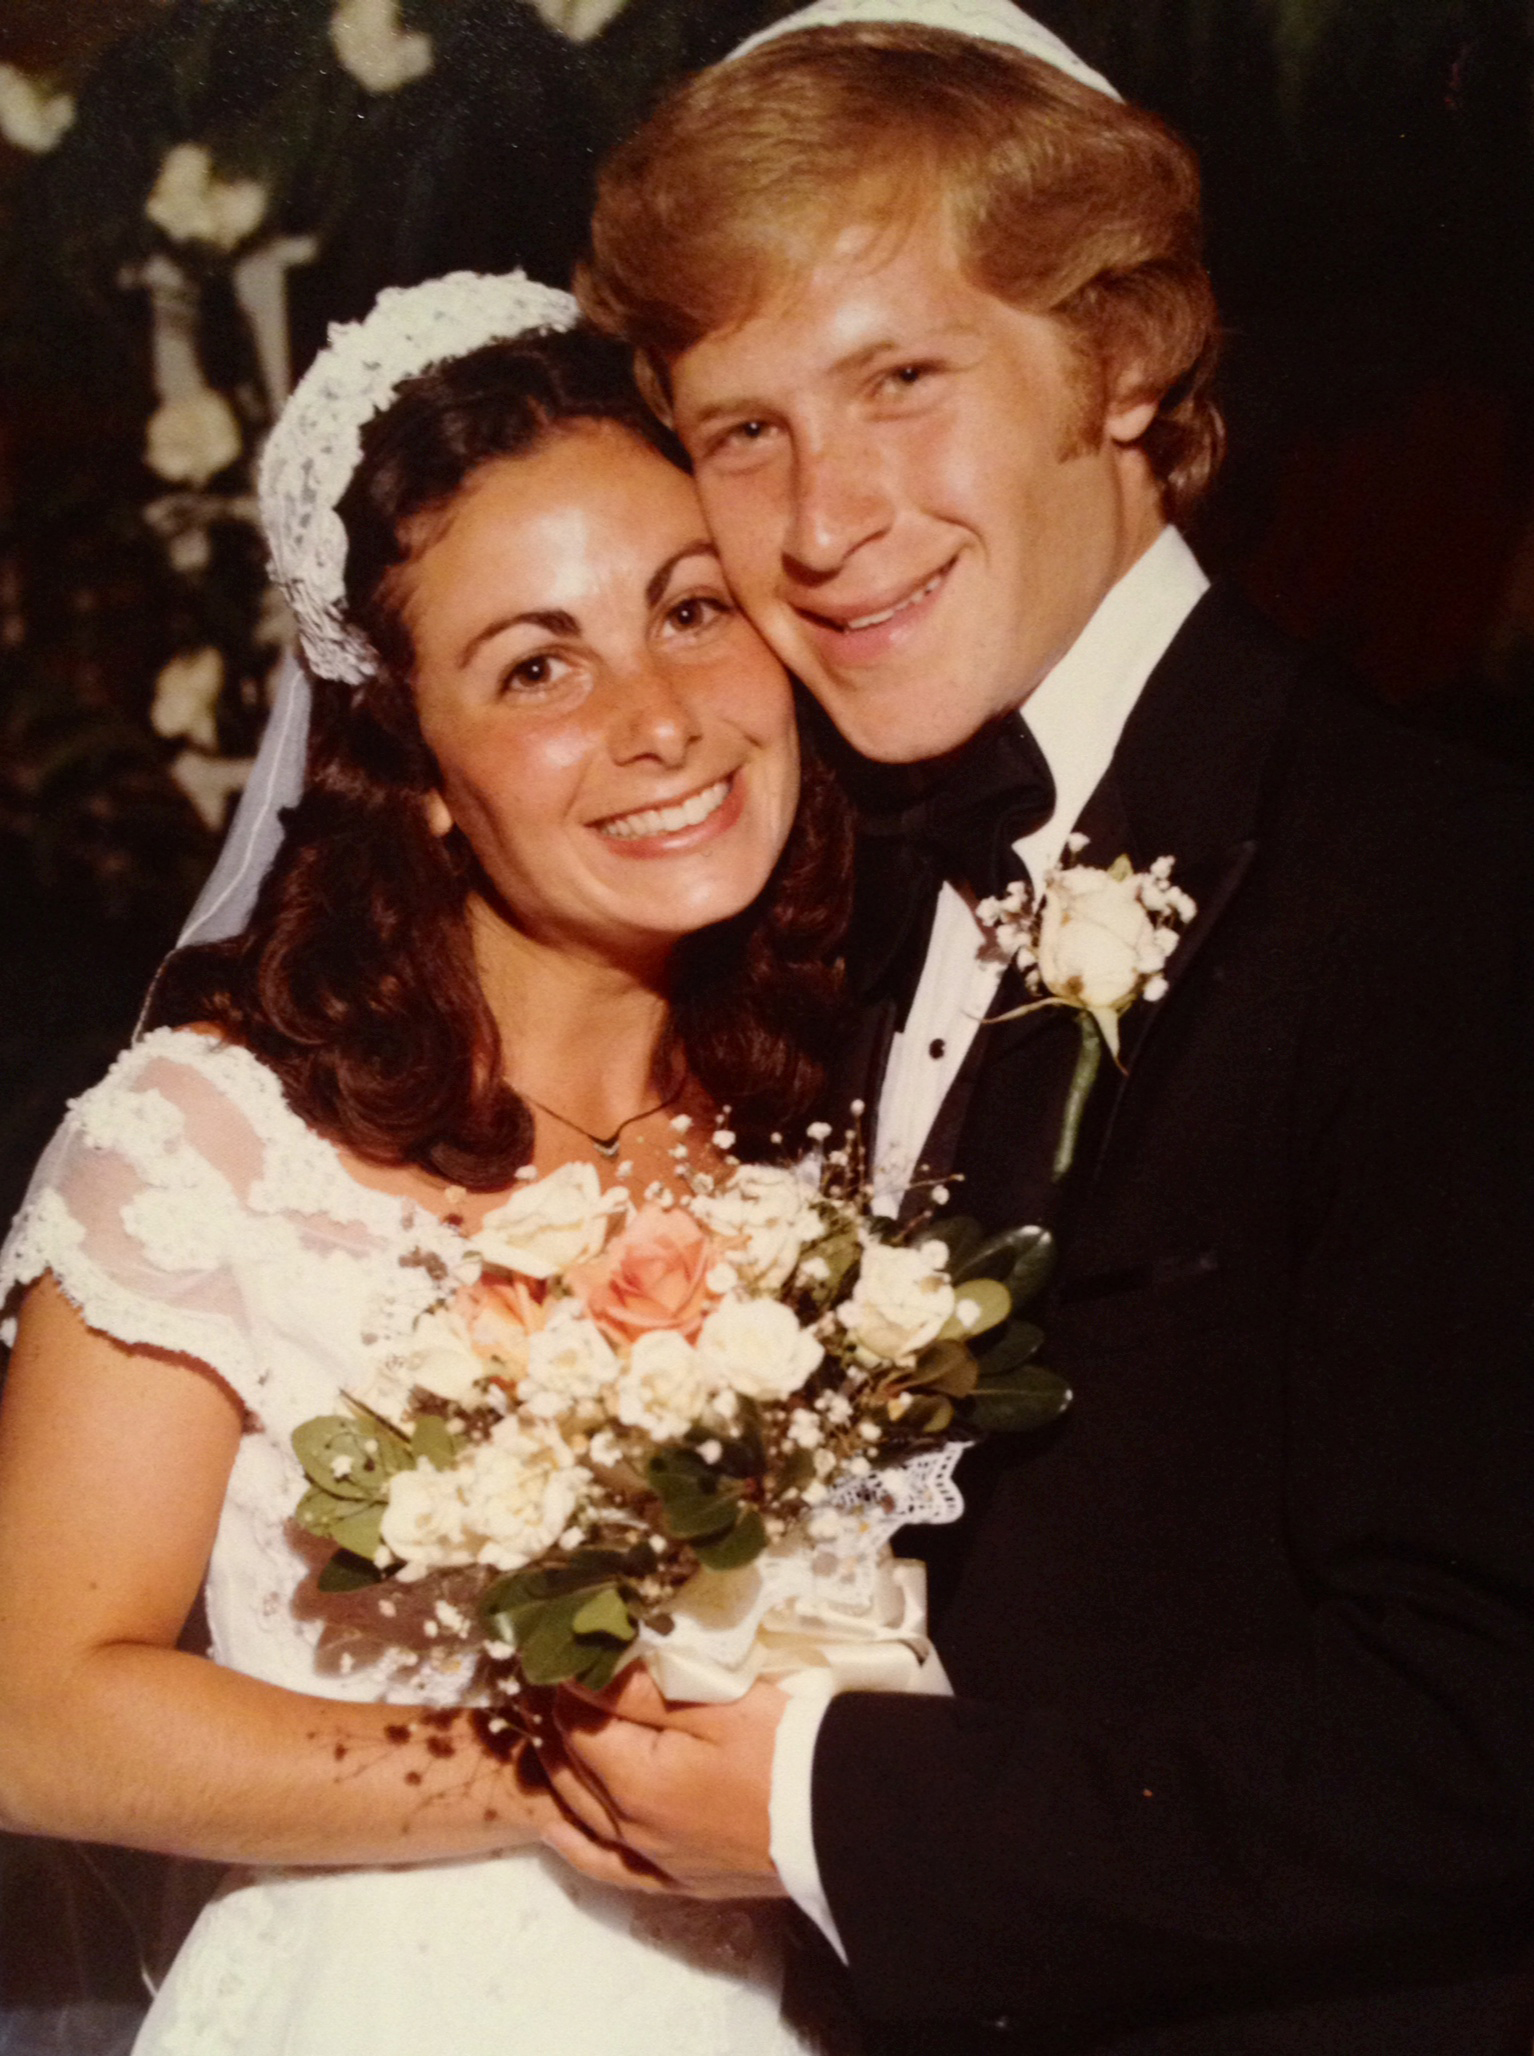 PHOTO: July 3, 1979: Bruce & Susan Winter (parents of Andrea) were married at The Pfister hotel. 